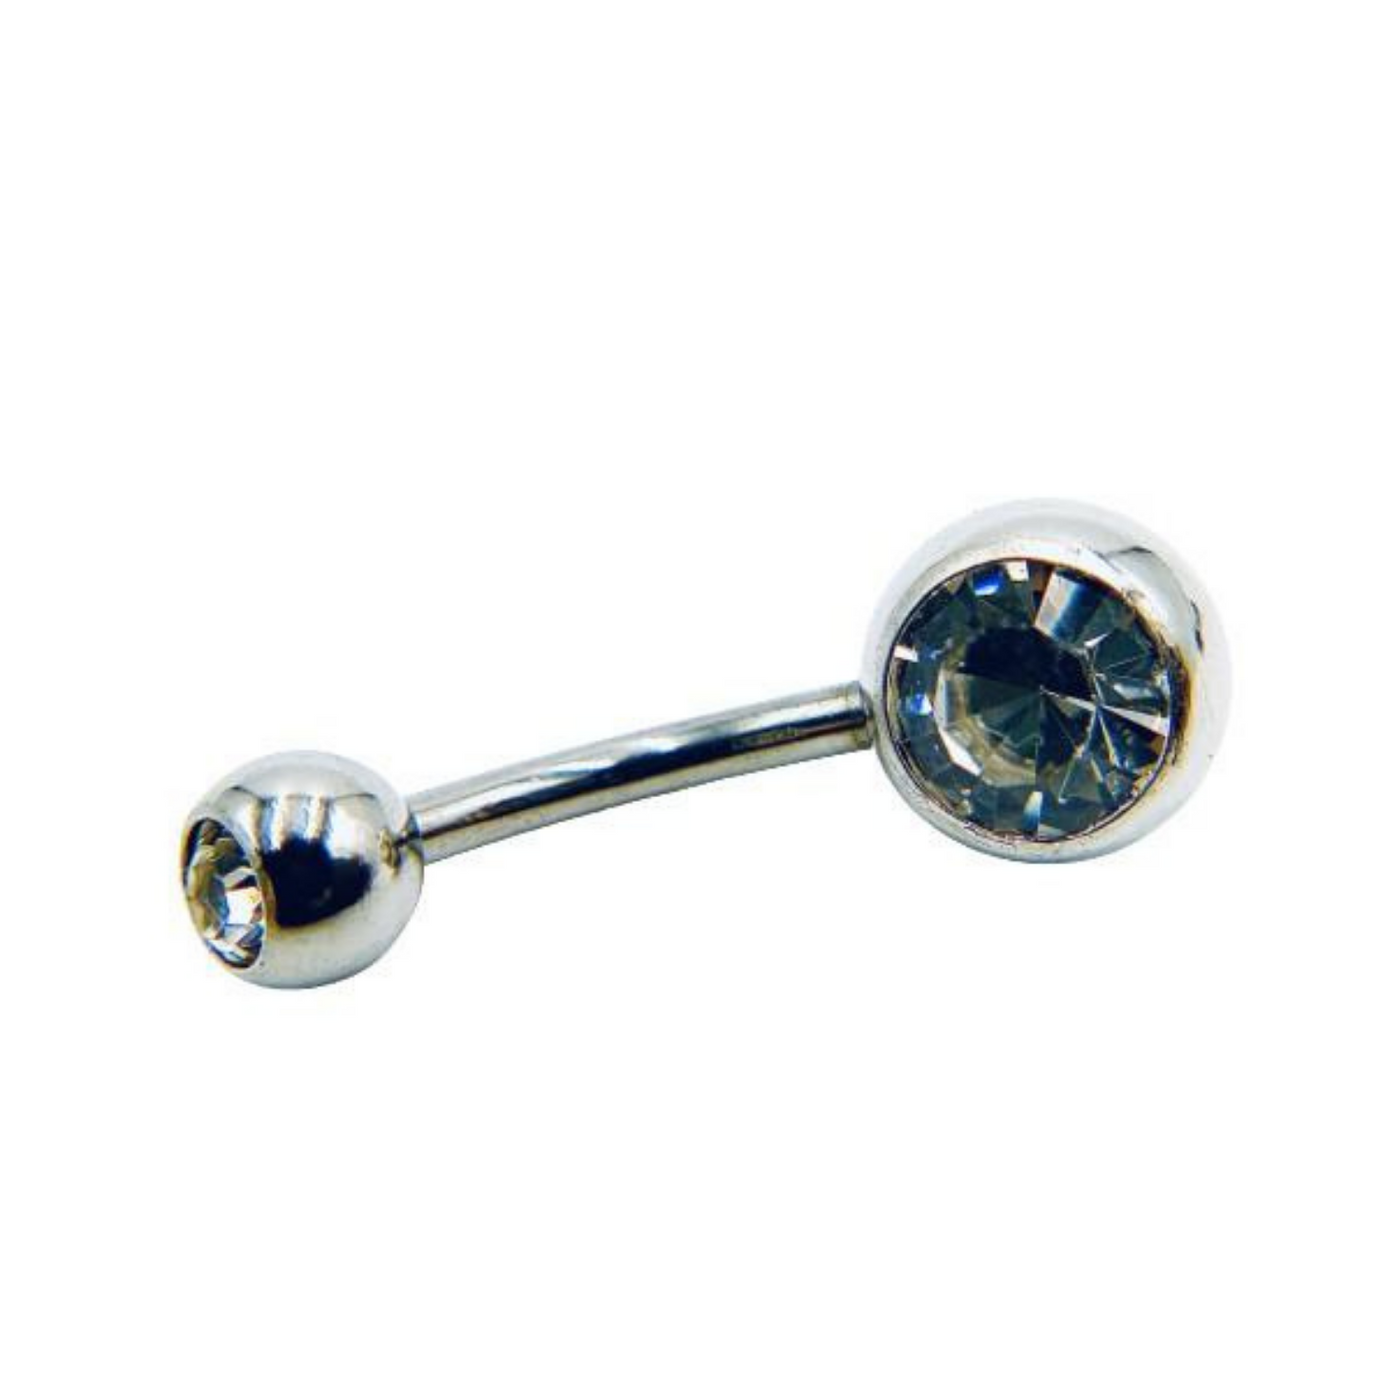 Double Crystal Navel (Belly) Jewelry